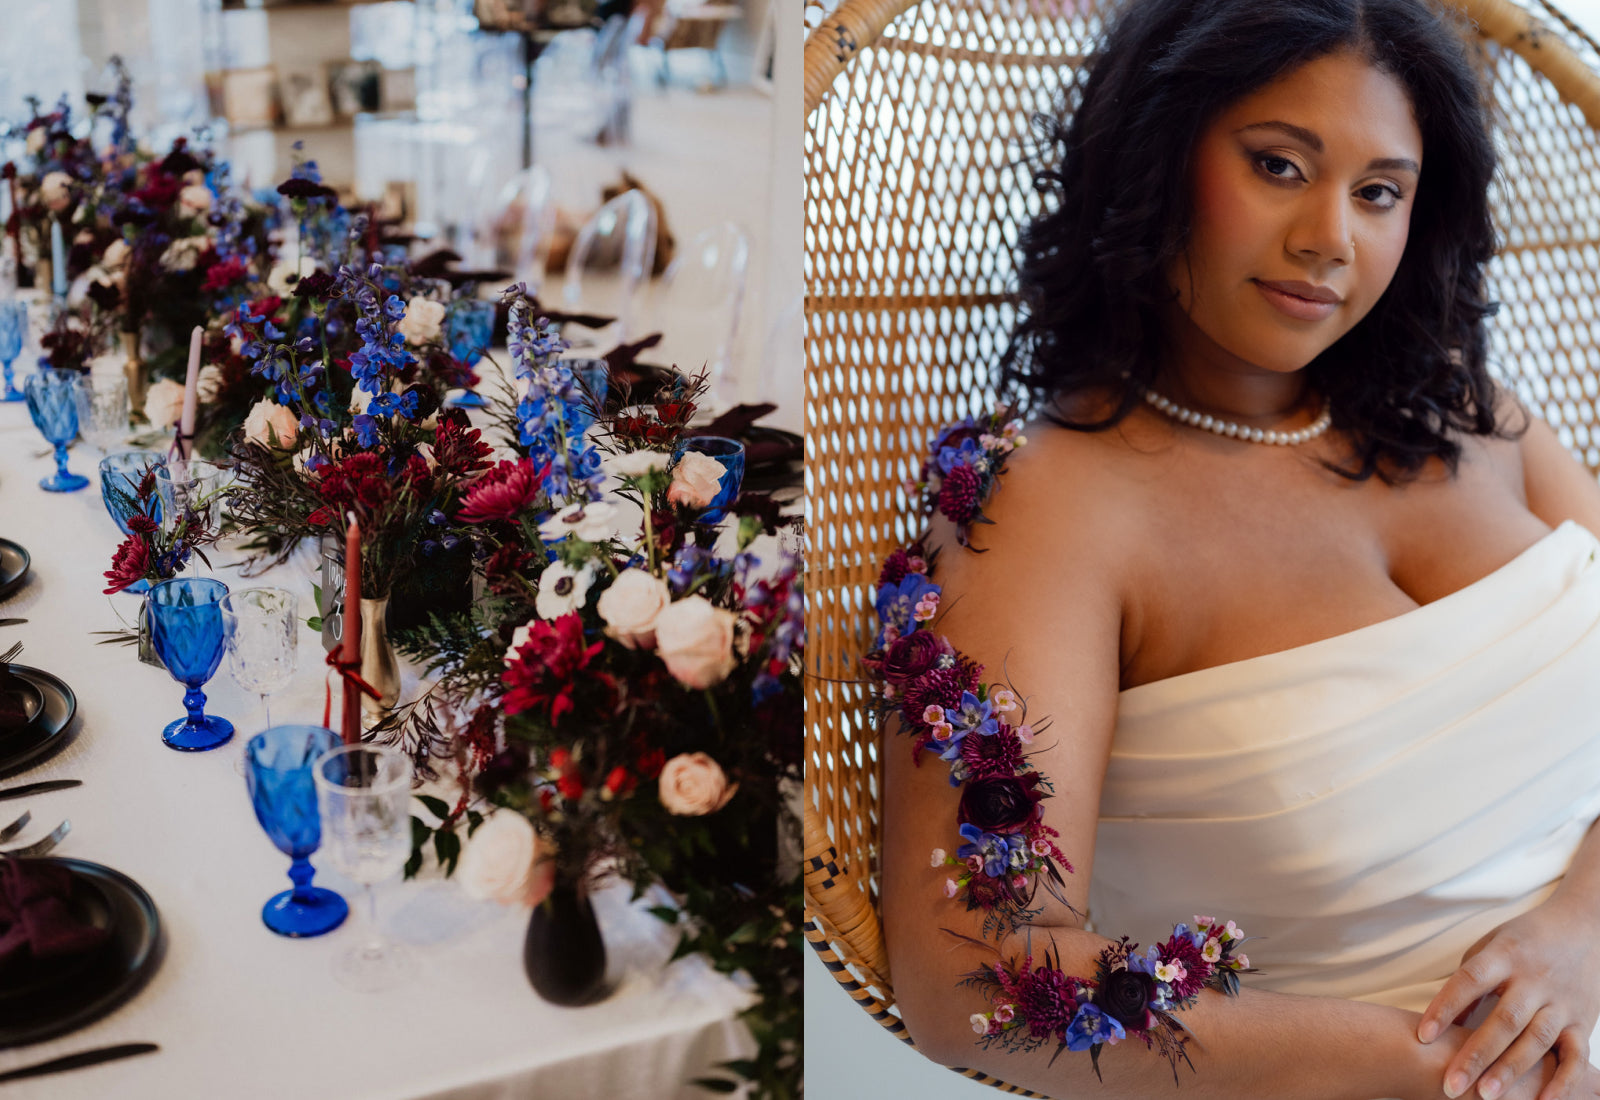 Two photos. One is a table setting off with dark purple and blue flowers down the middle. The second is a portrait of a bride with fresh florals attached to her body.